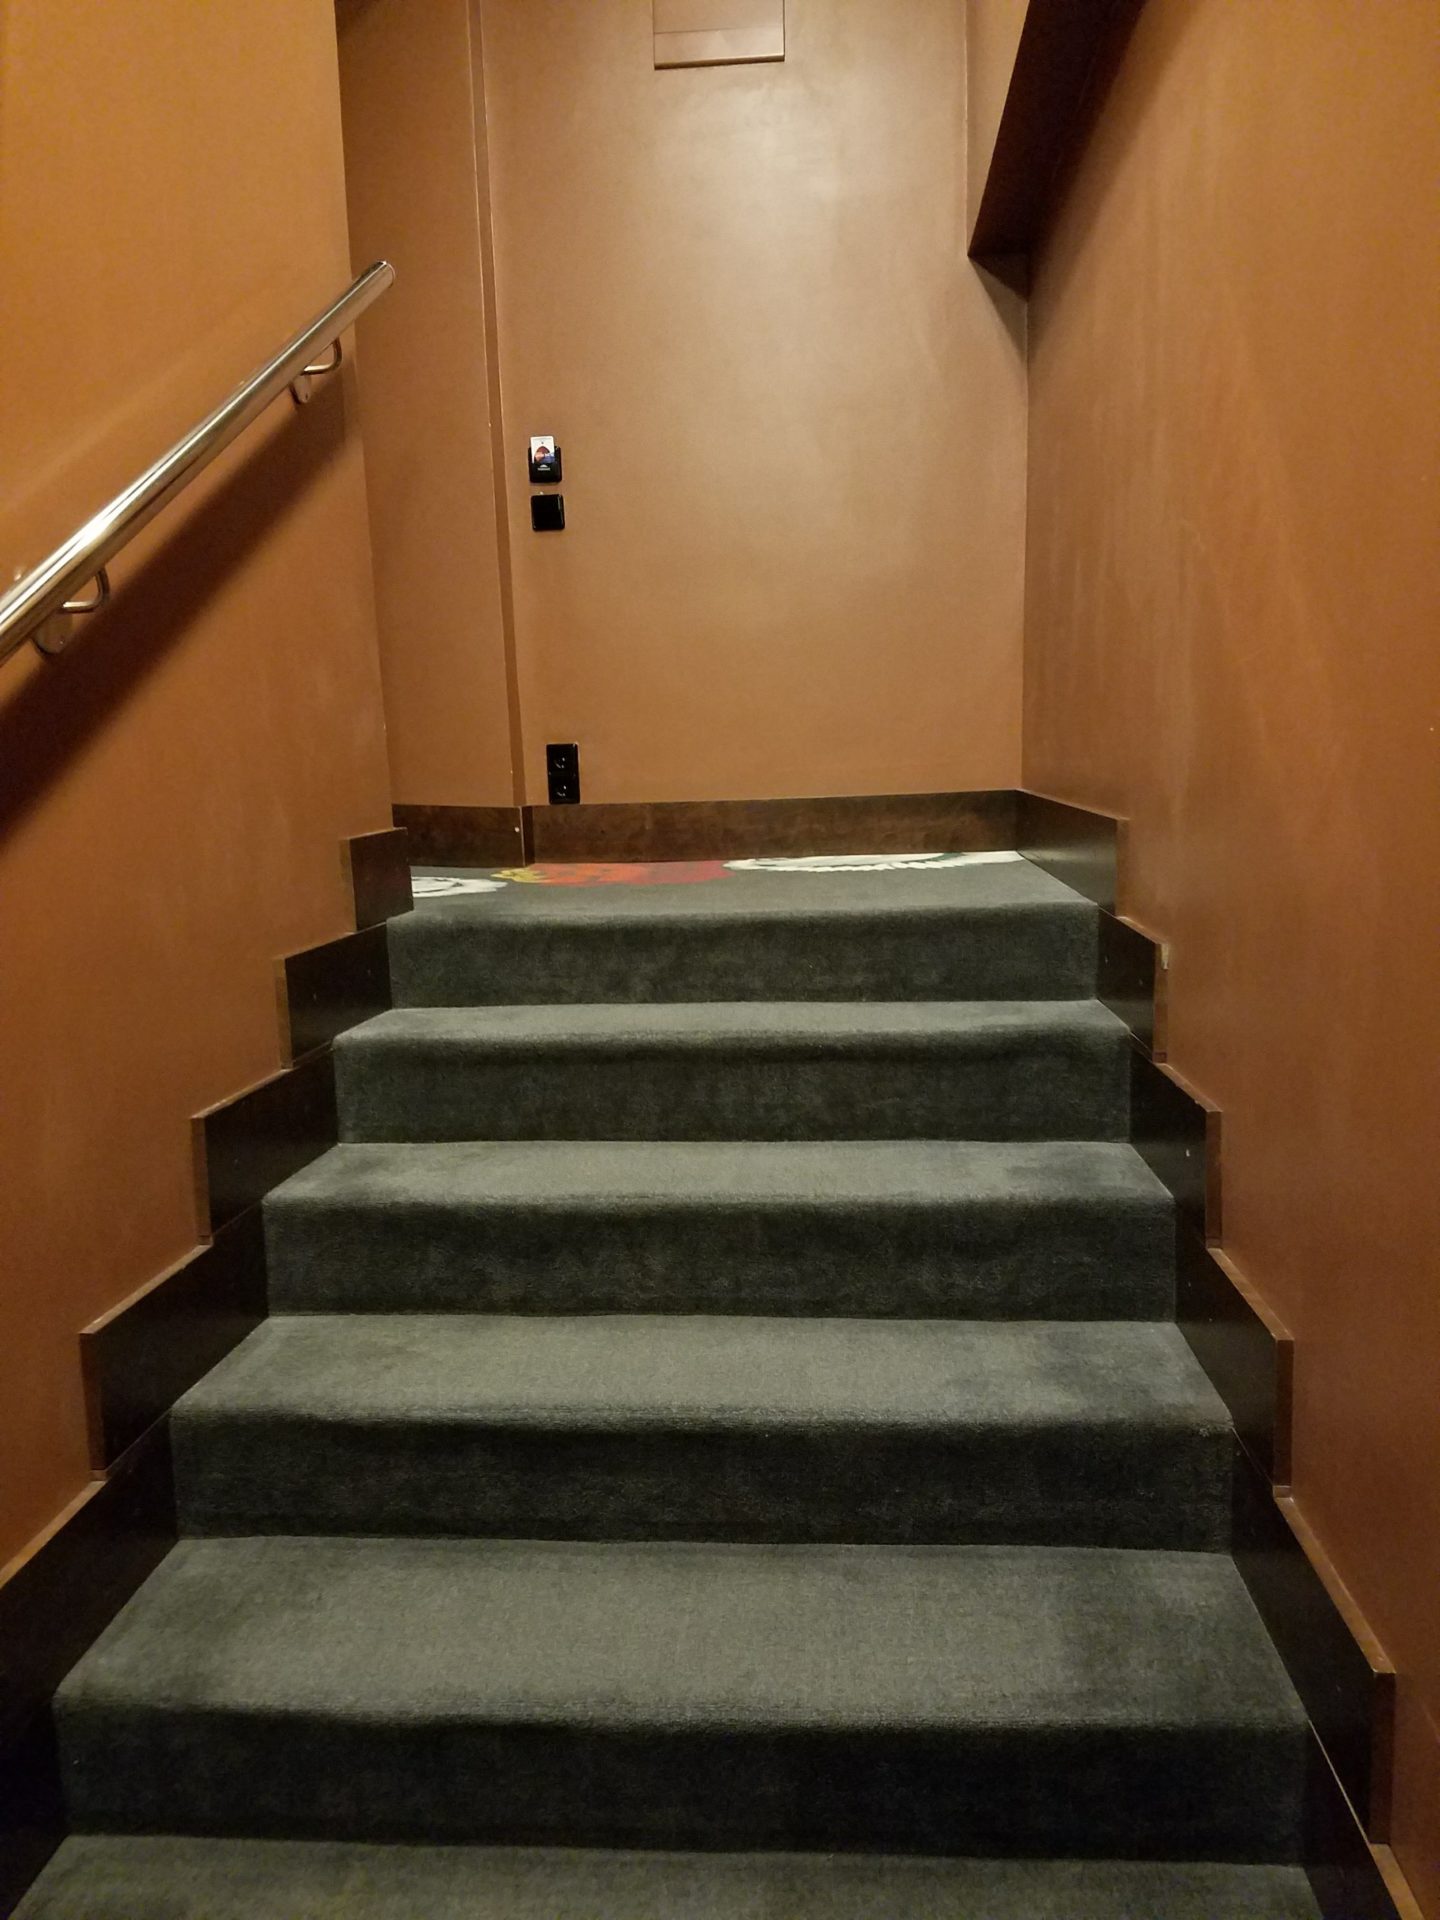 a staircase with a handrail and a door